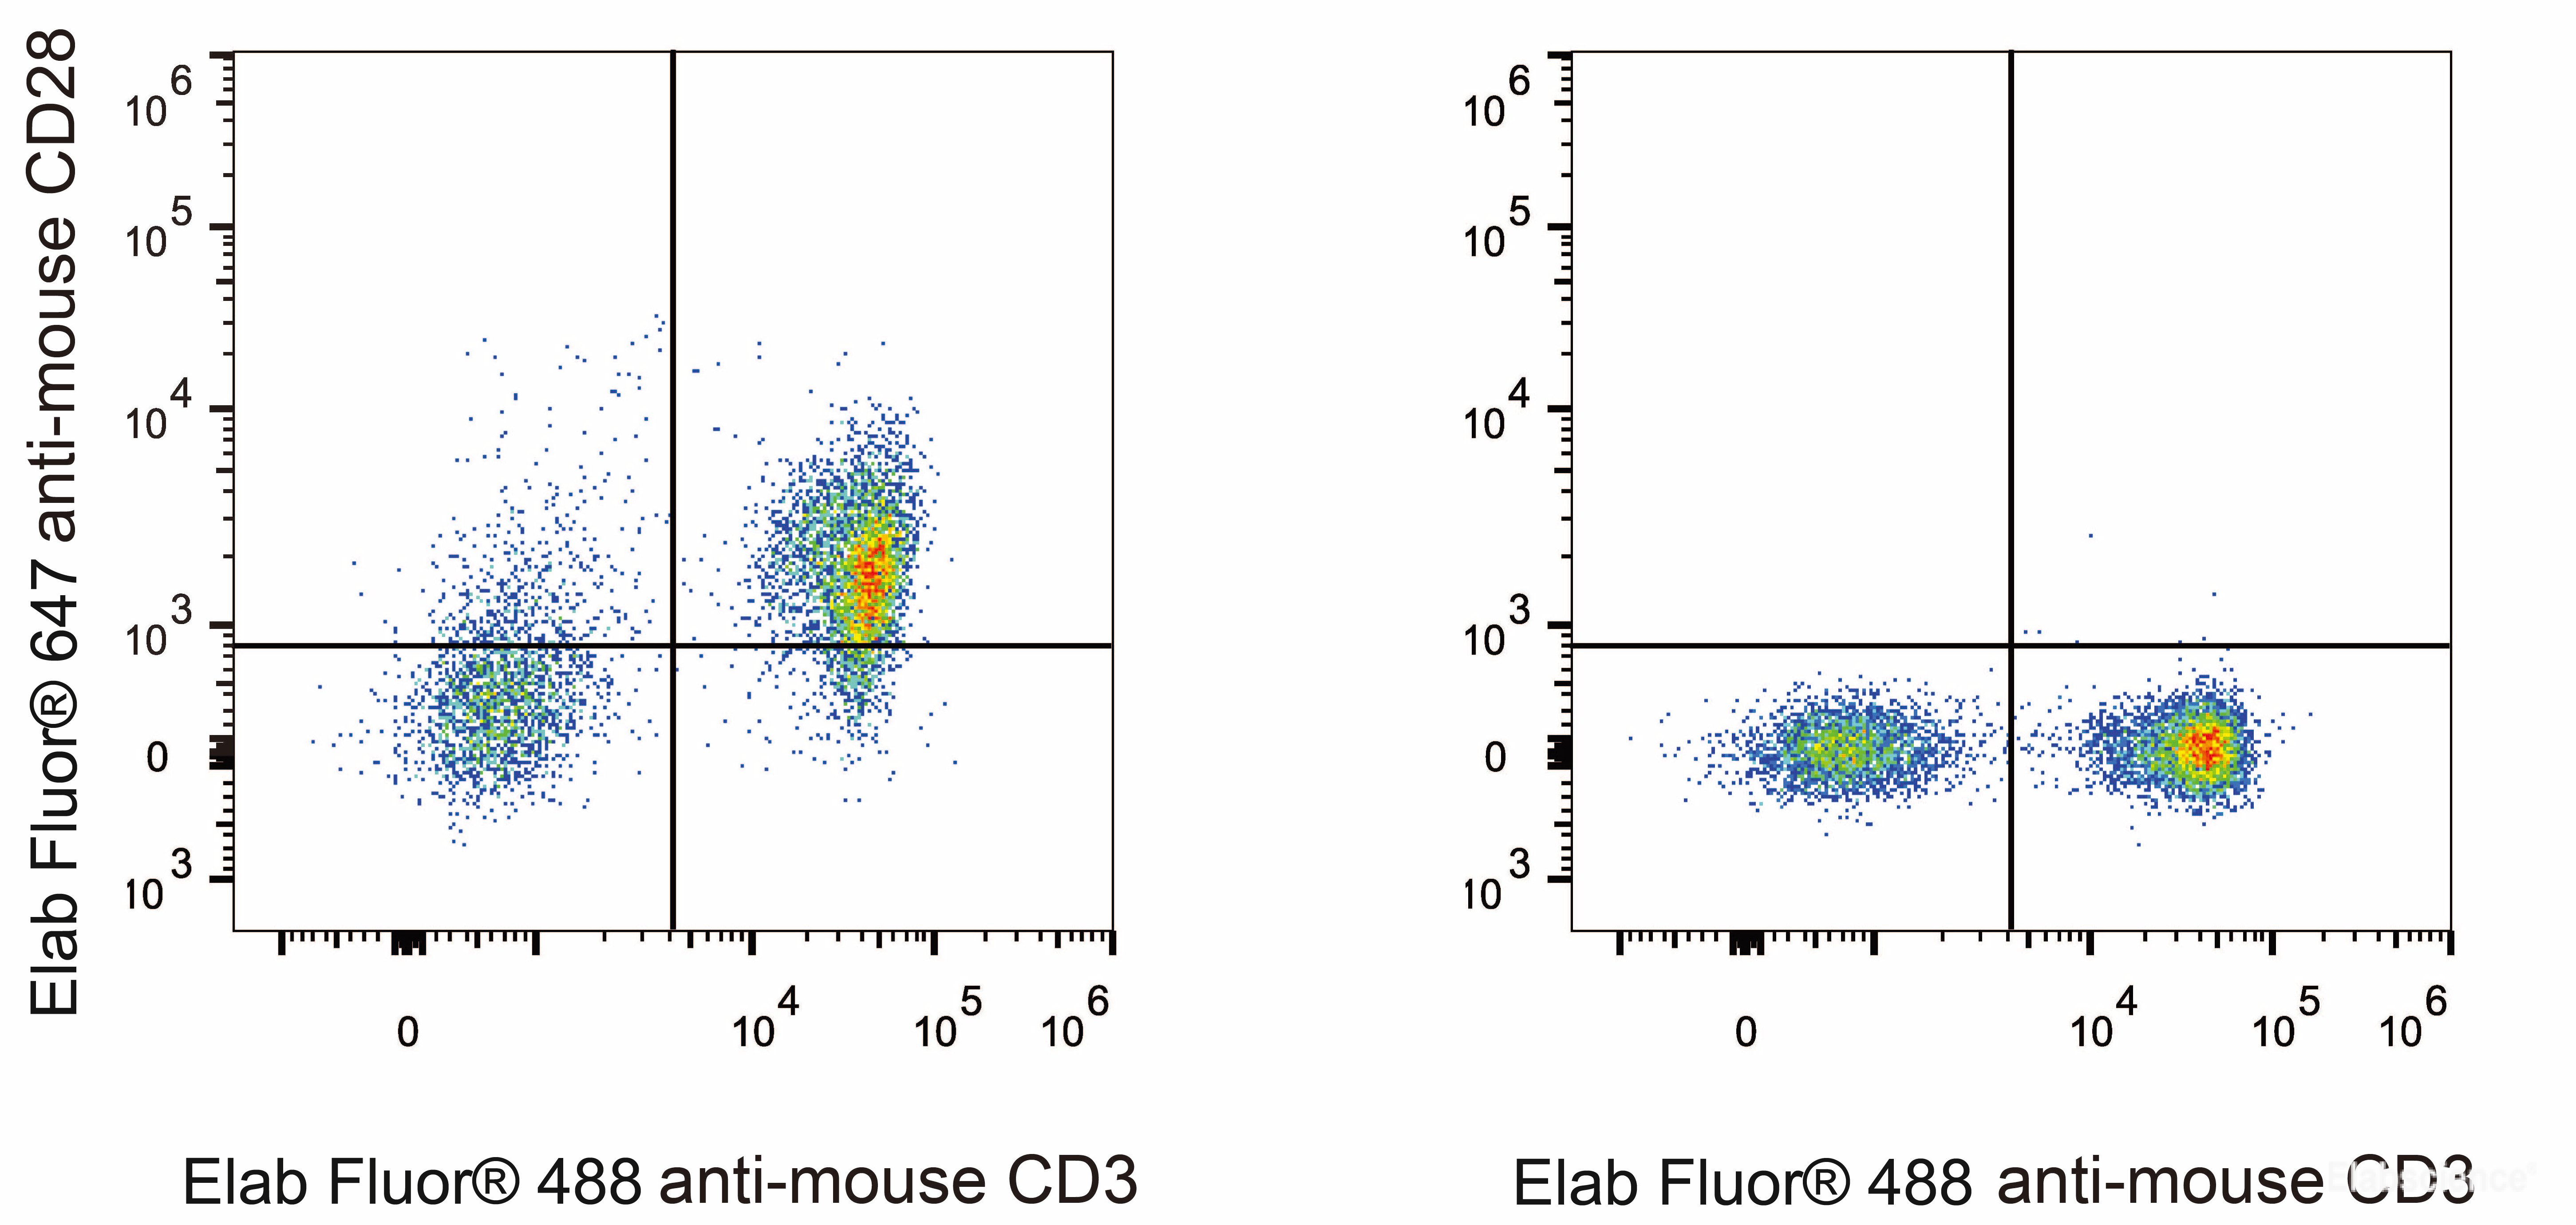 C57BL/6 murine splenocytes are stained with Elab Fluor<sup>®</sup> 647 Anti-Mouse CD28 Antibody and Elab Fluor<sup>®</sup> 488 Anti-Mouse CD3 Antibody (Left). Splenocytes stained with Elab Fluor<sup>®</sup> 488 Anti-Mouse CD3 Antibody (Right) are used as control.